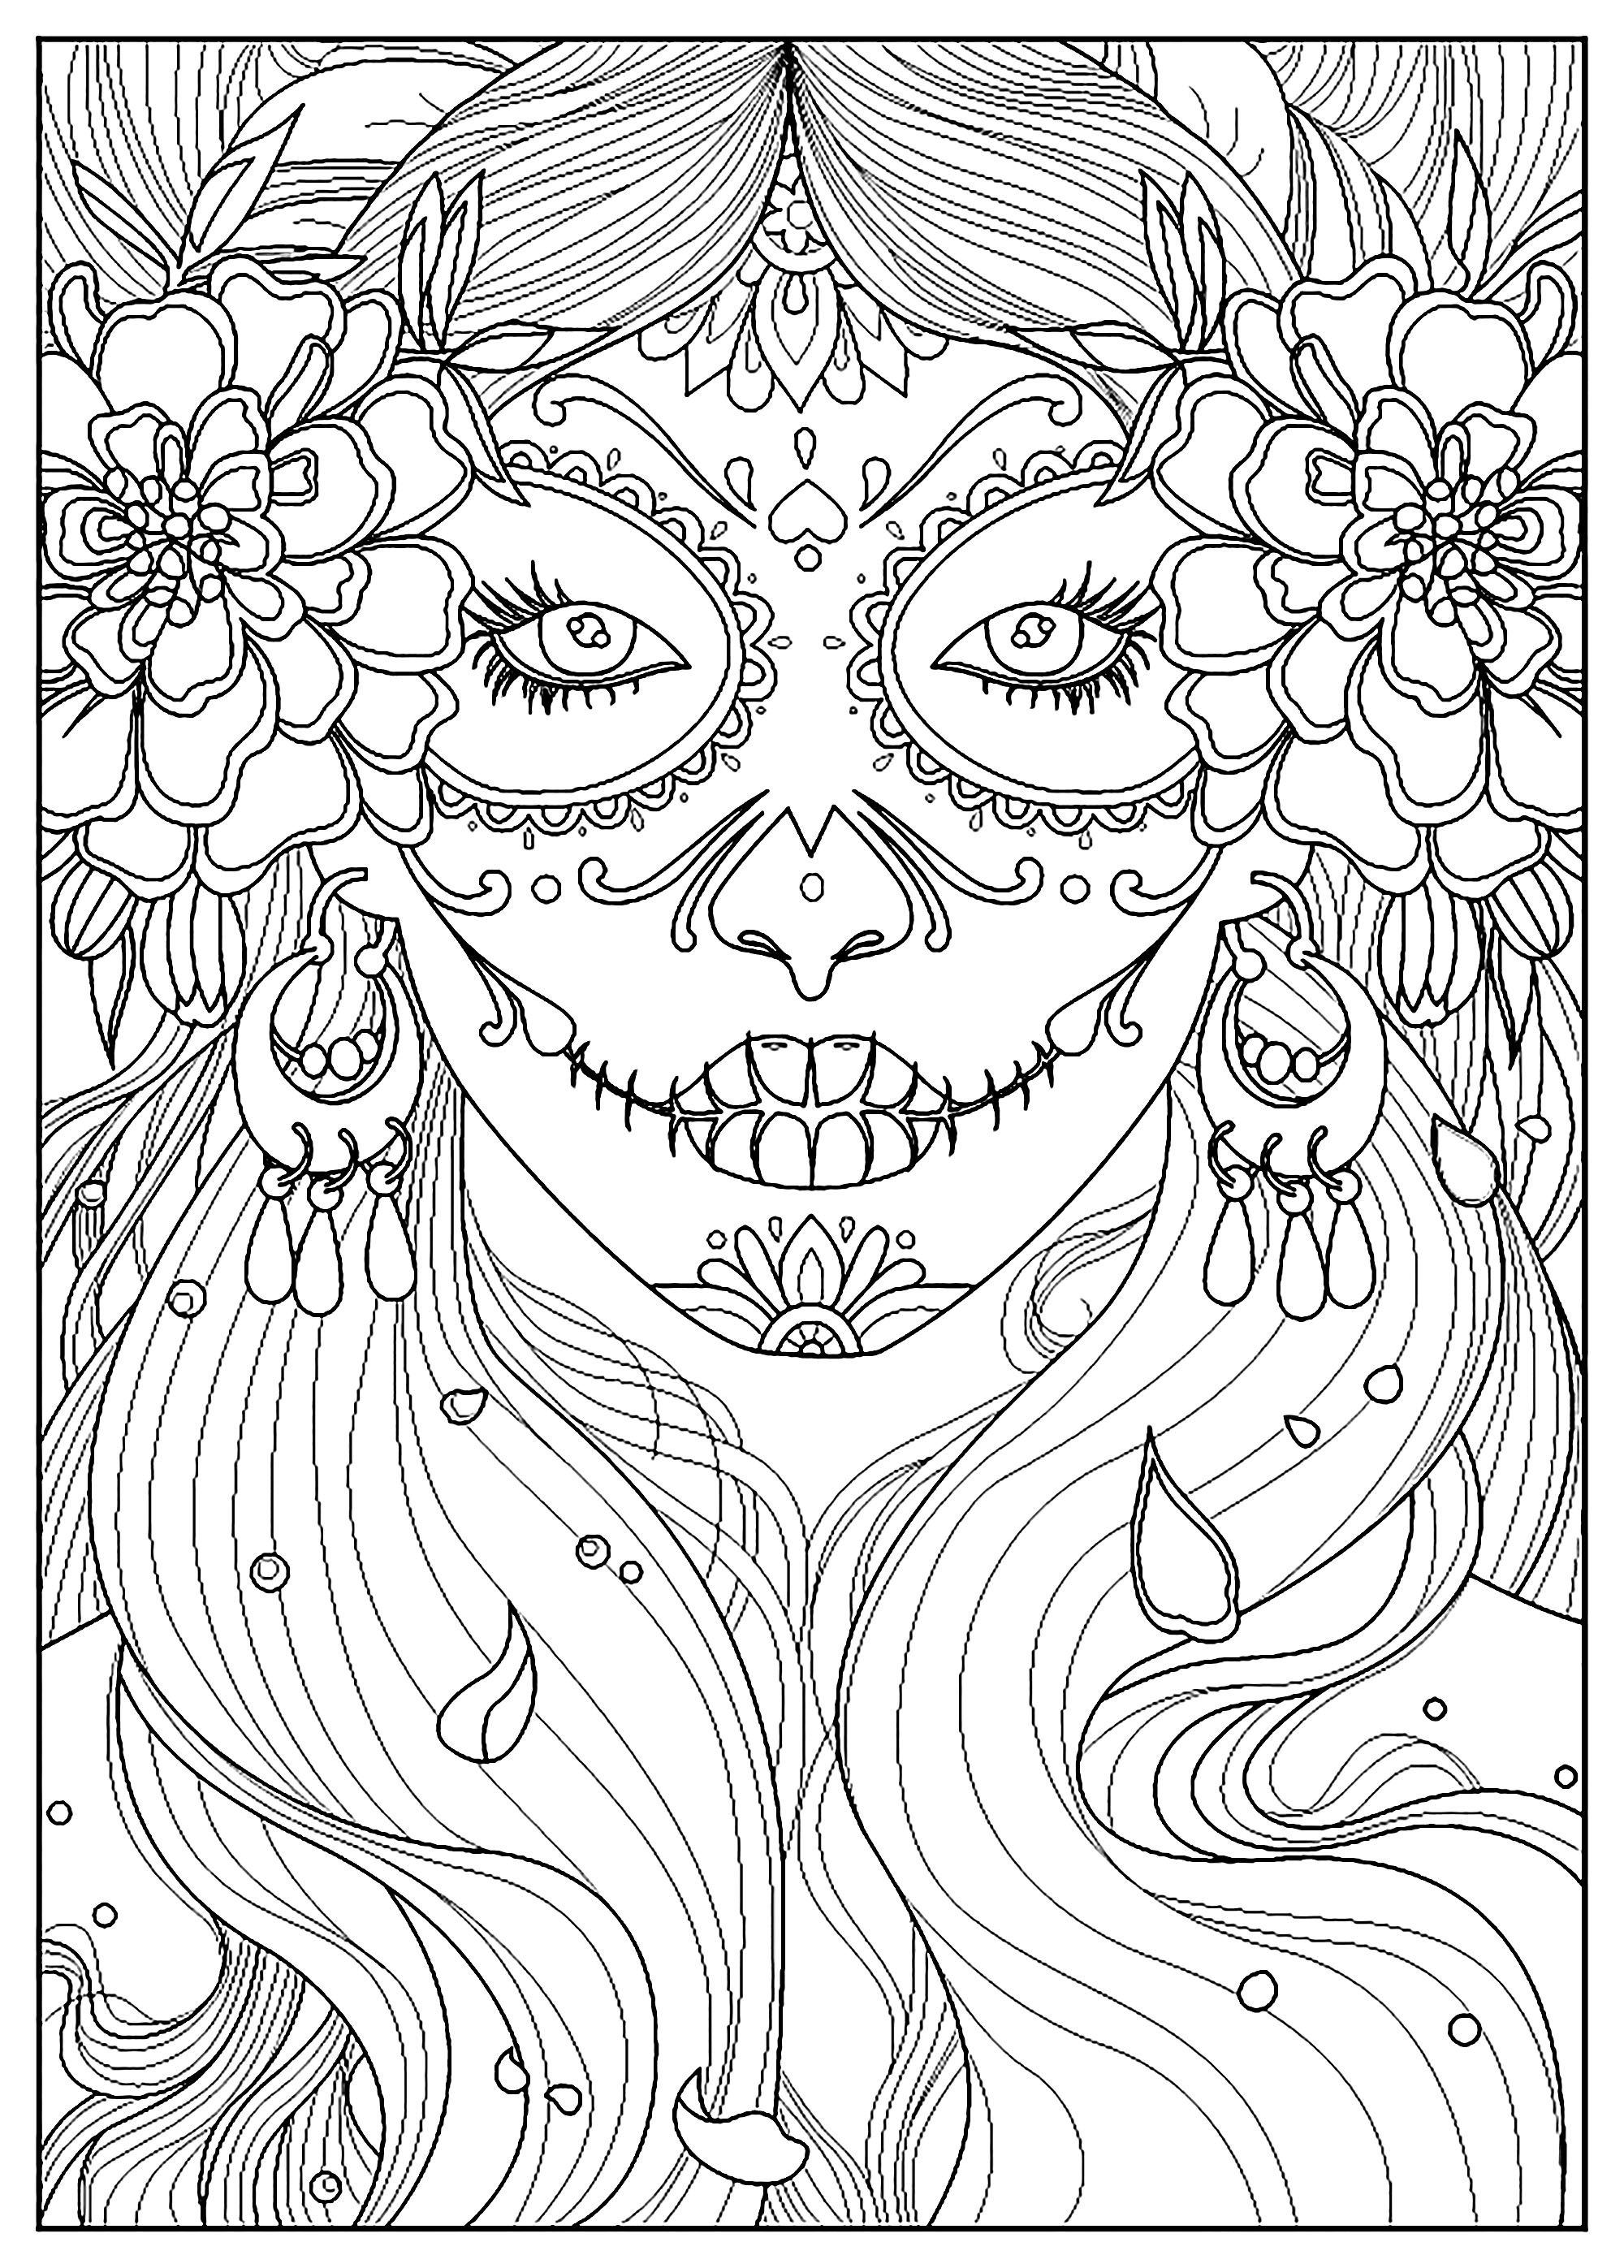 Day of the Dead make-up coloring page, Artist : Juline